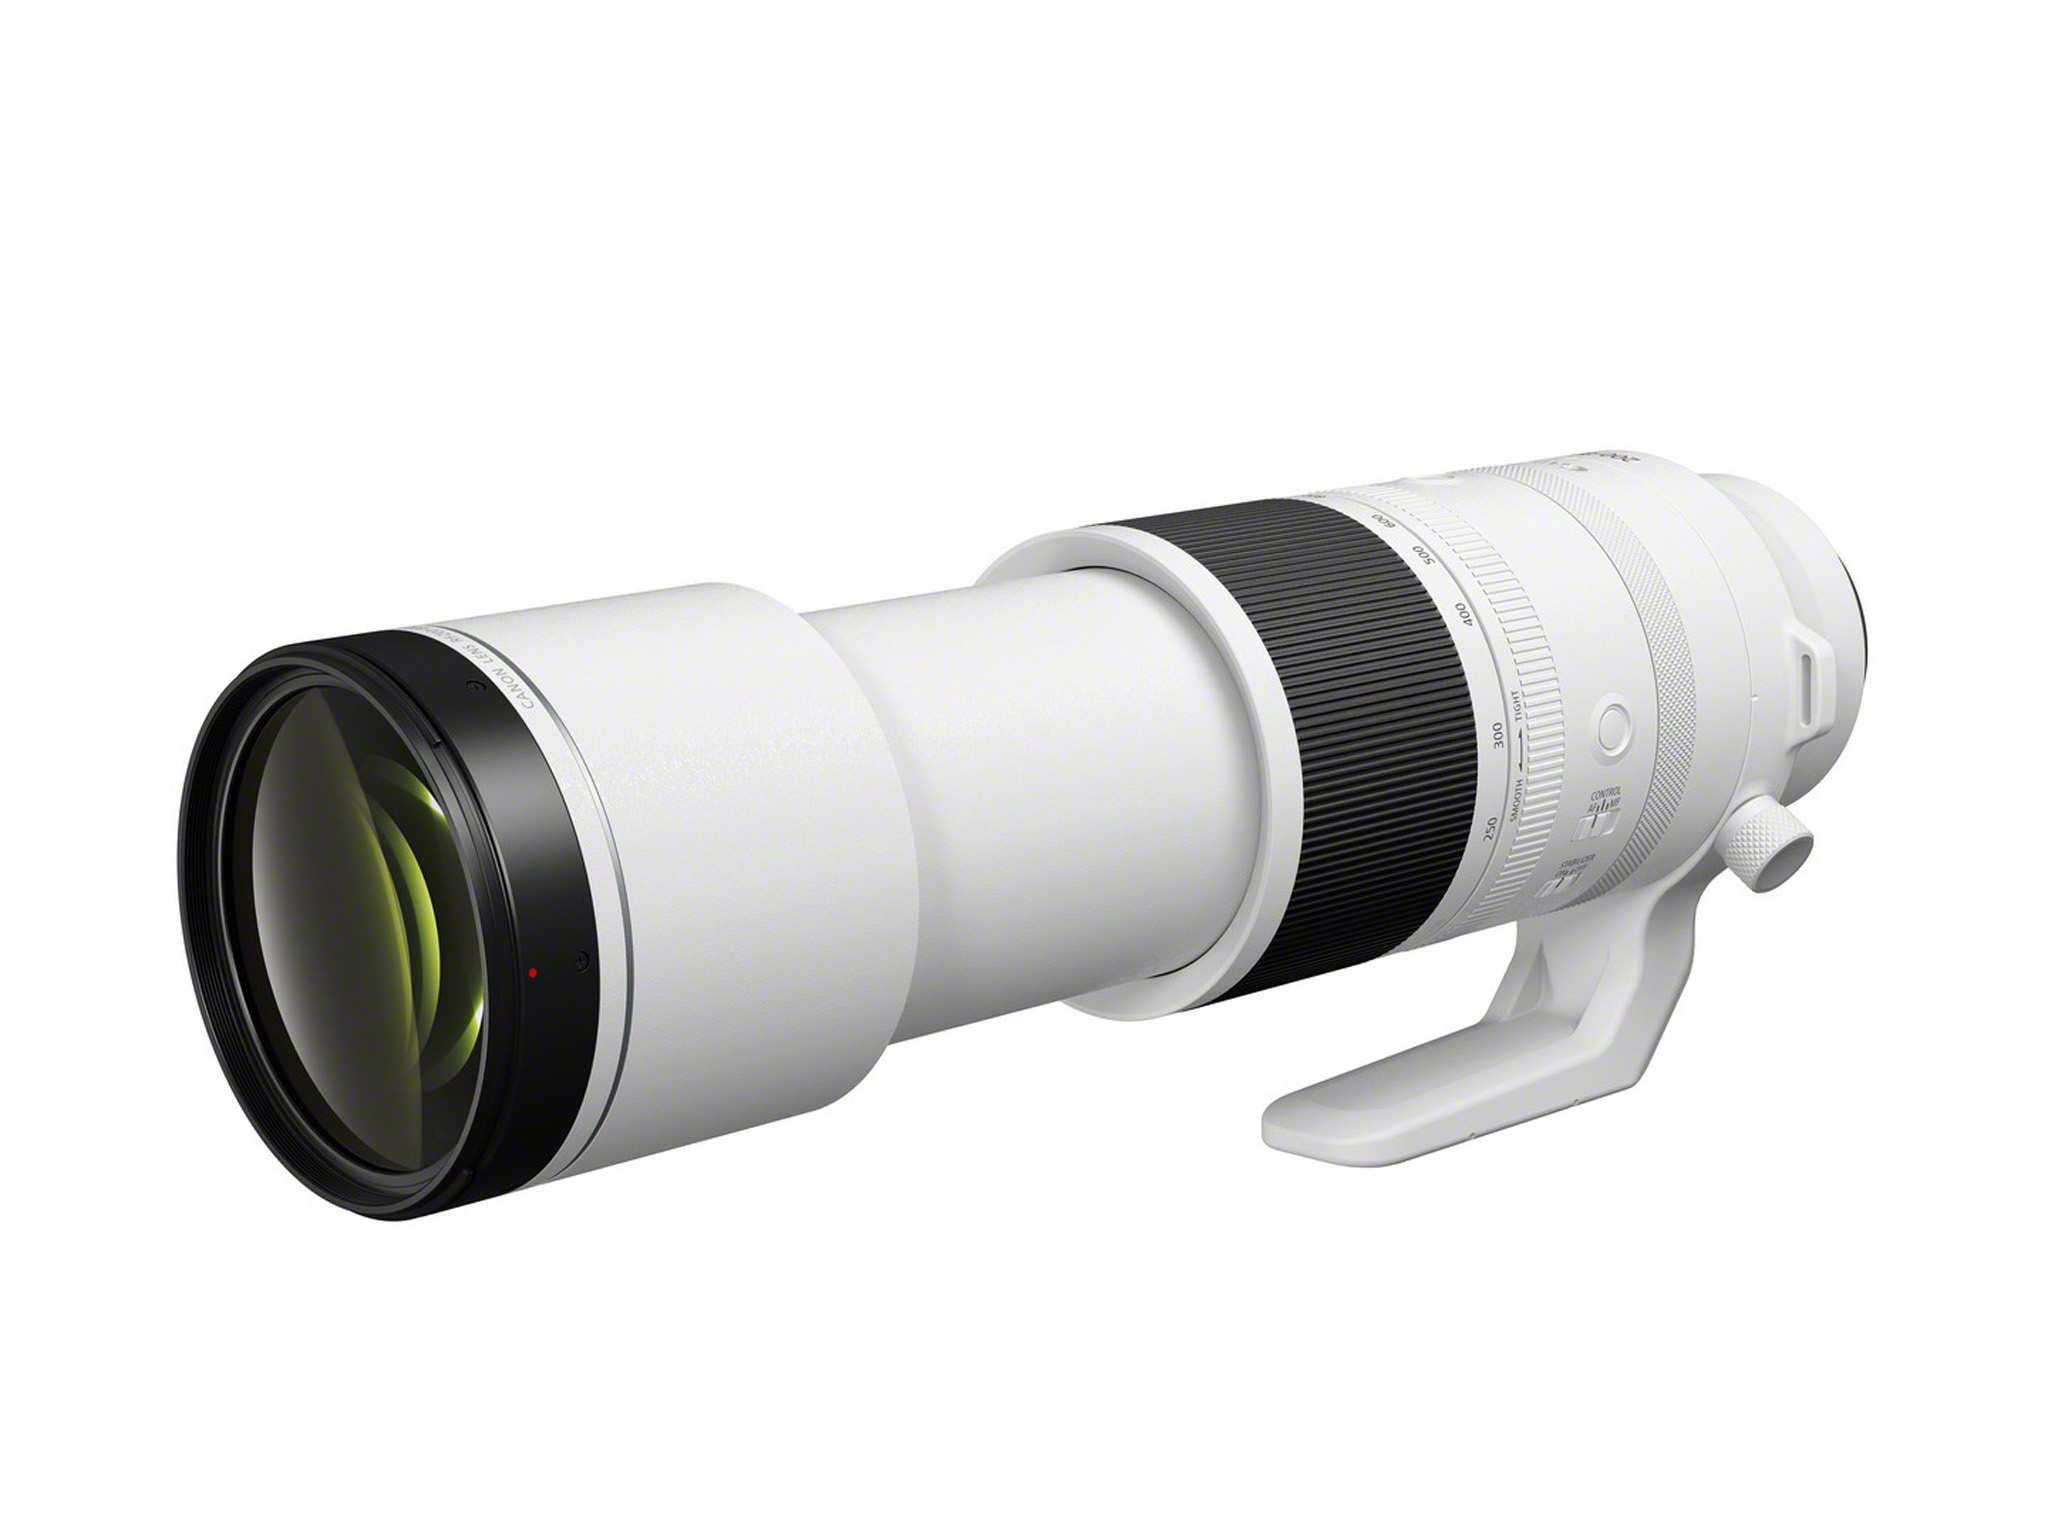 Canon RF 200-800 mm F6.3-9 IS USM